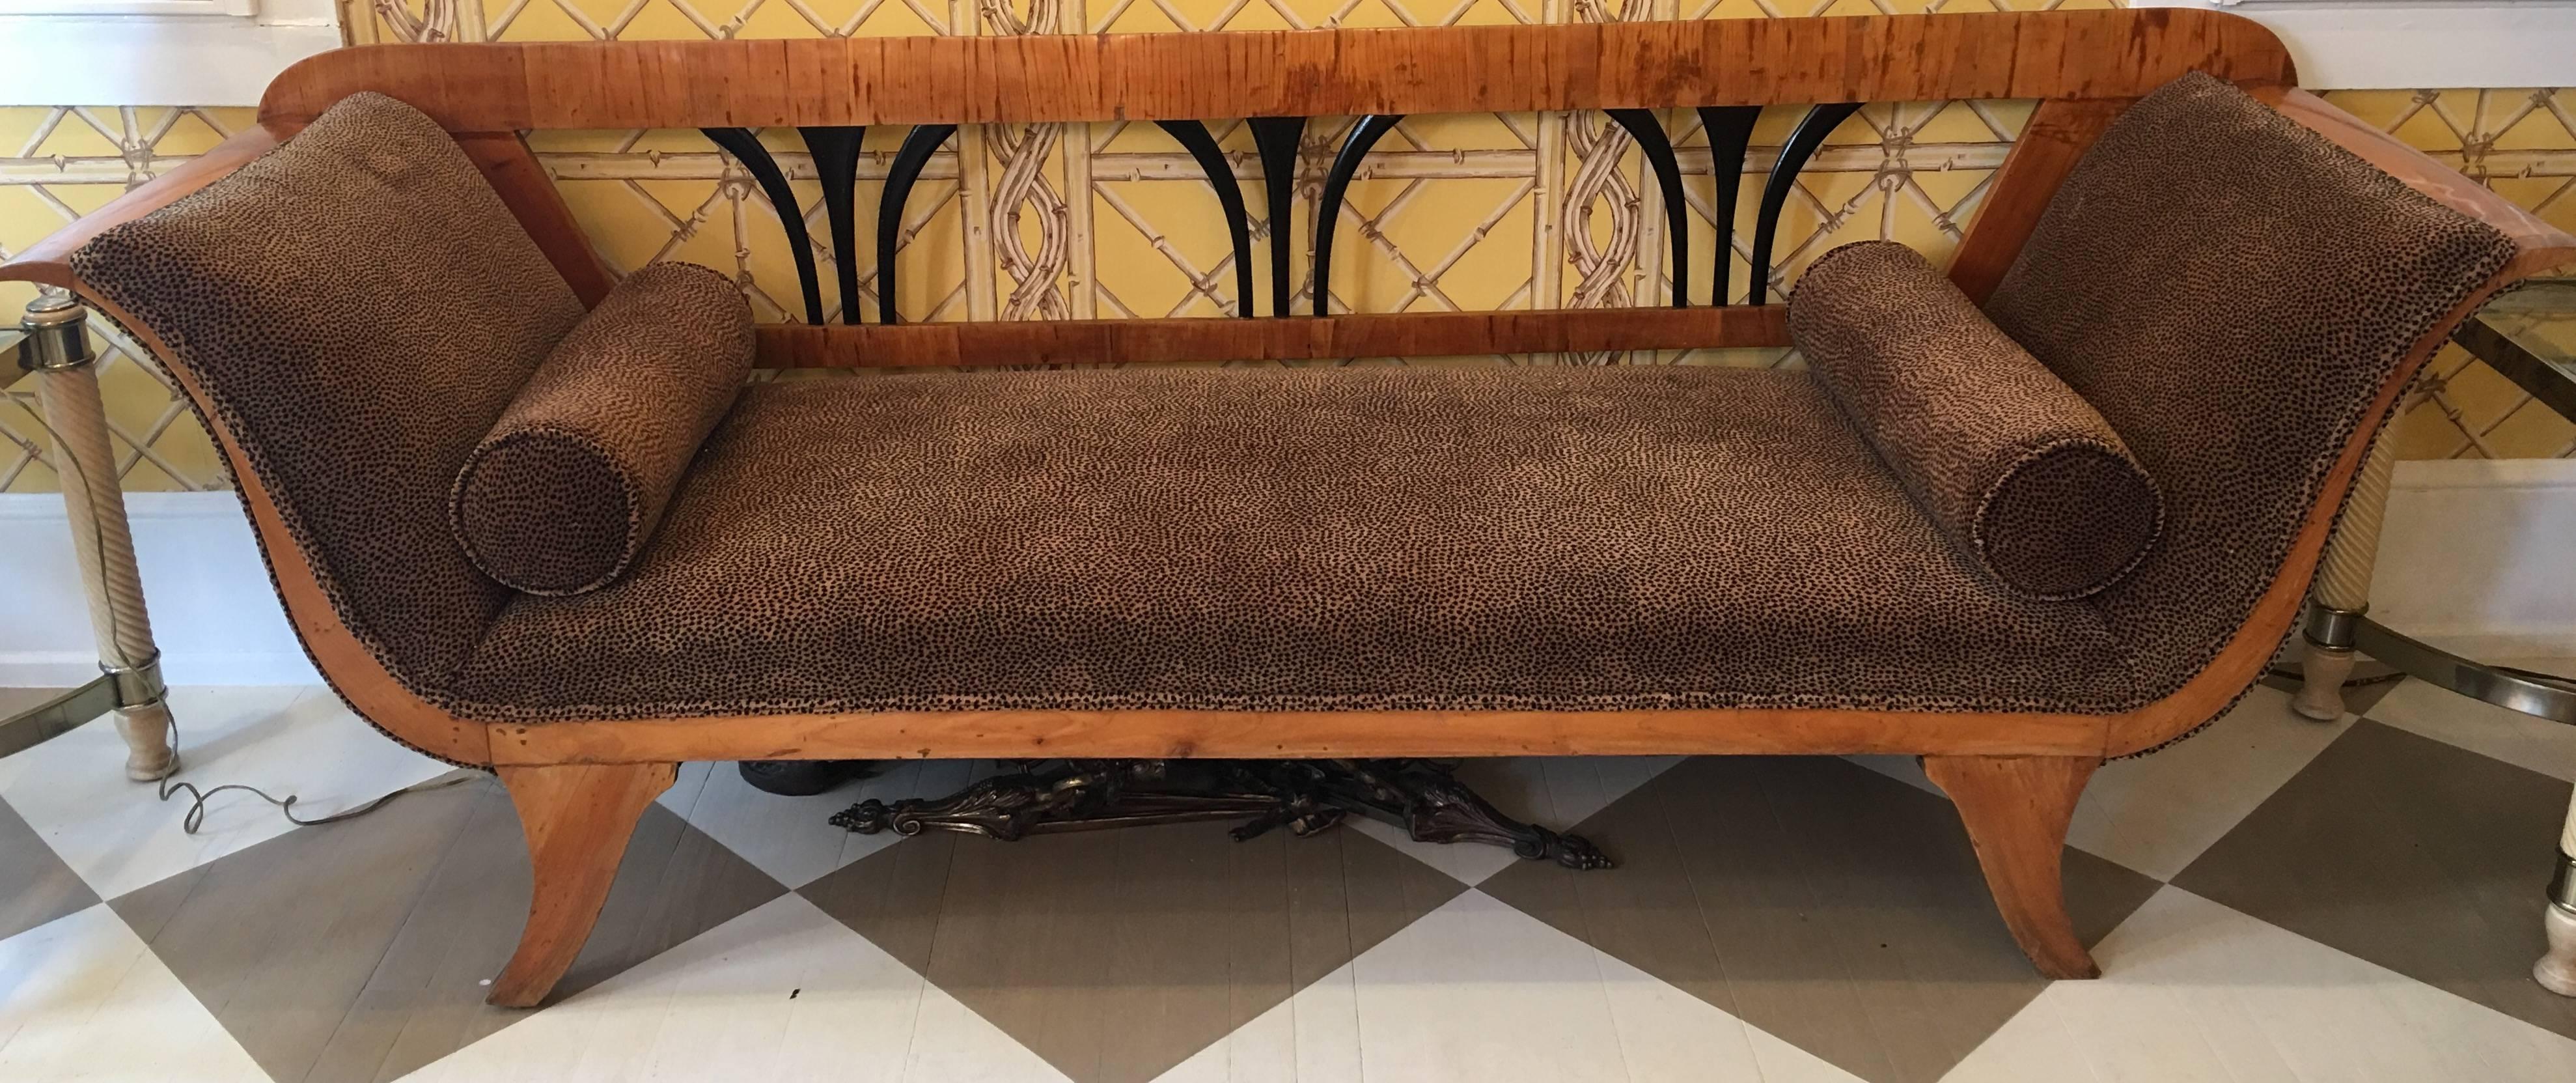 19th Century Austrian Biedermeier Sofa In Excellent Condition For Sale In Southampton, NY